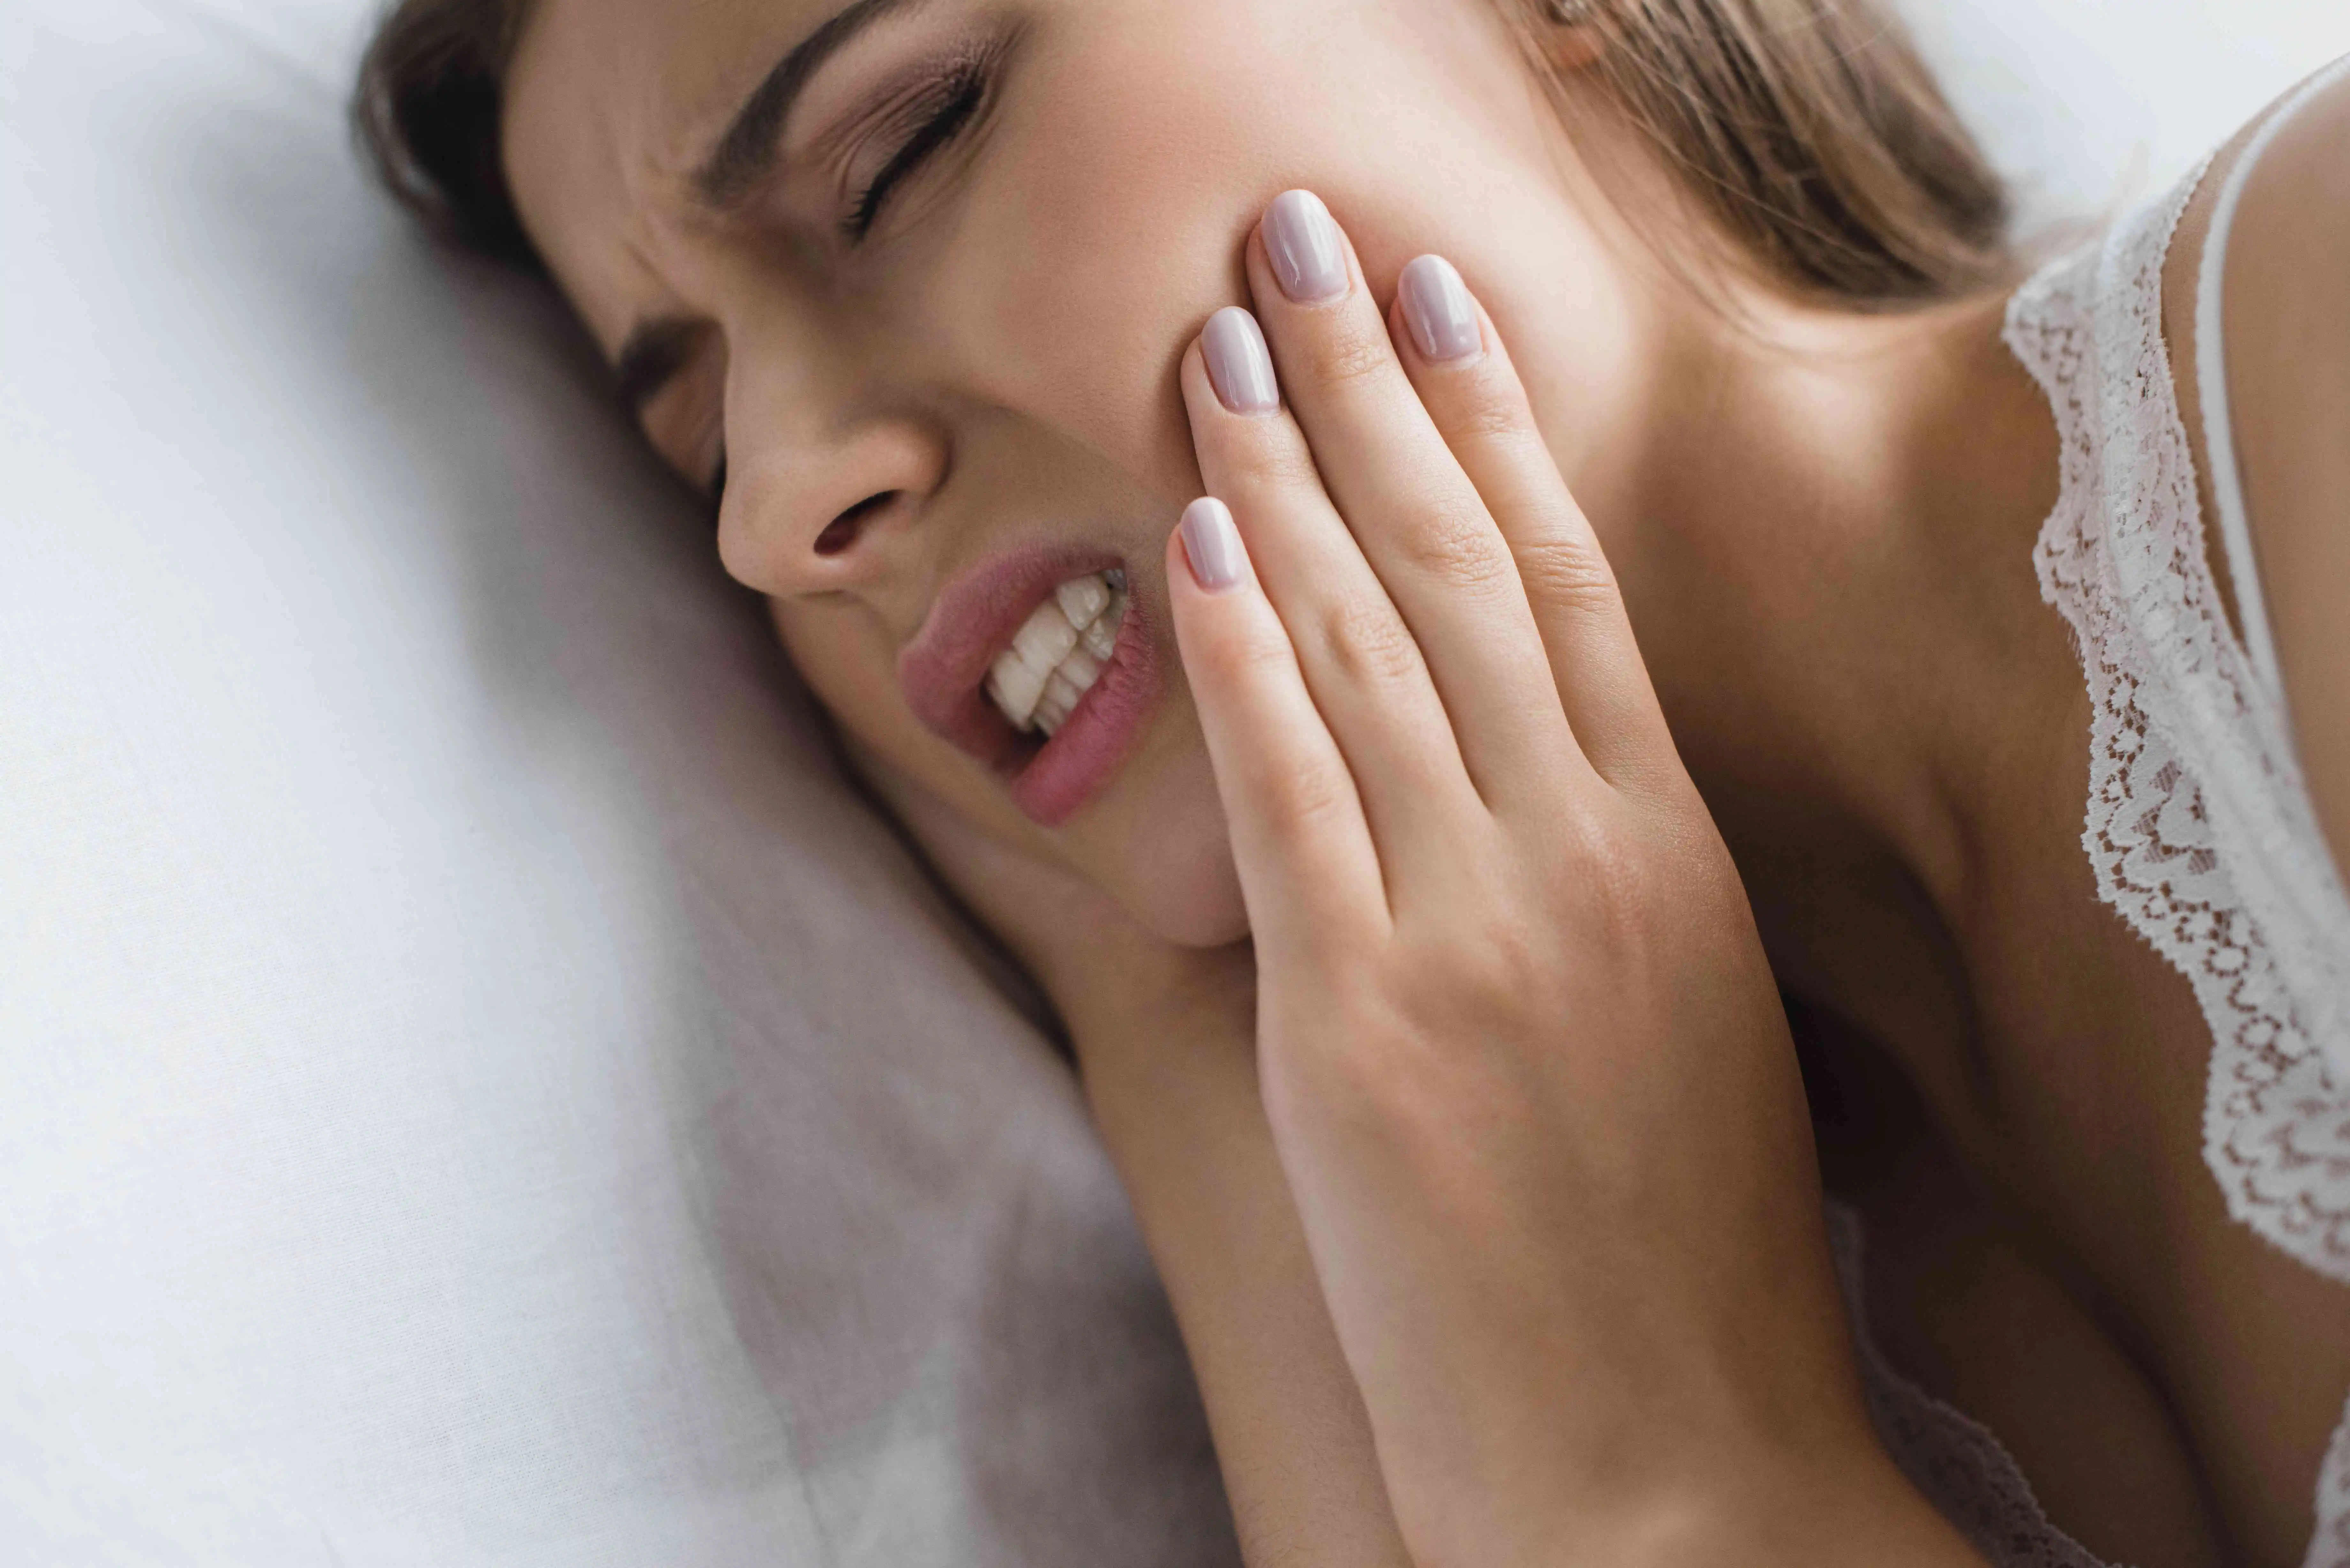 Toothache-Causes_-Symptoms_-Prevention Risks woman suffering from tootha